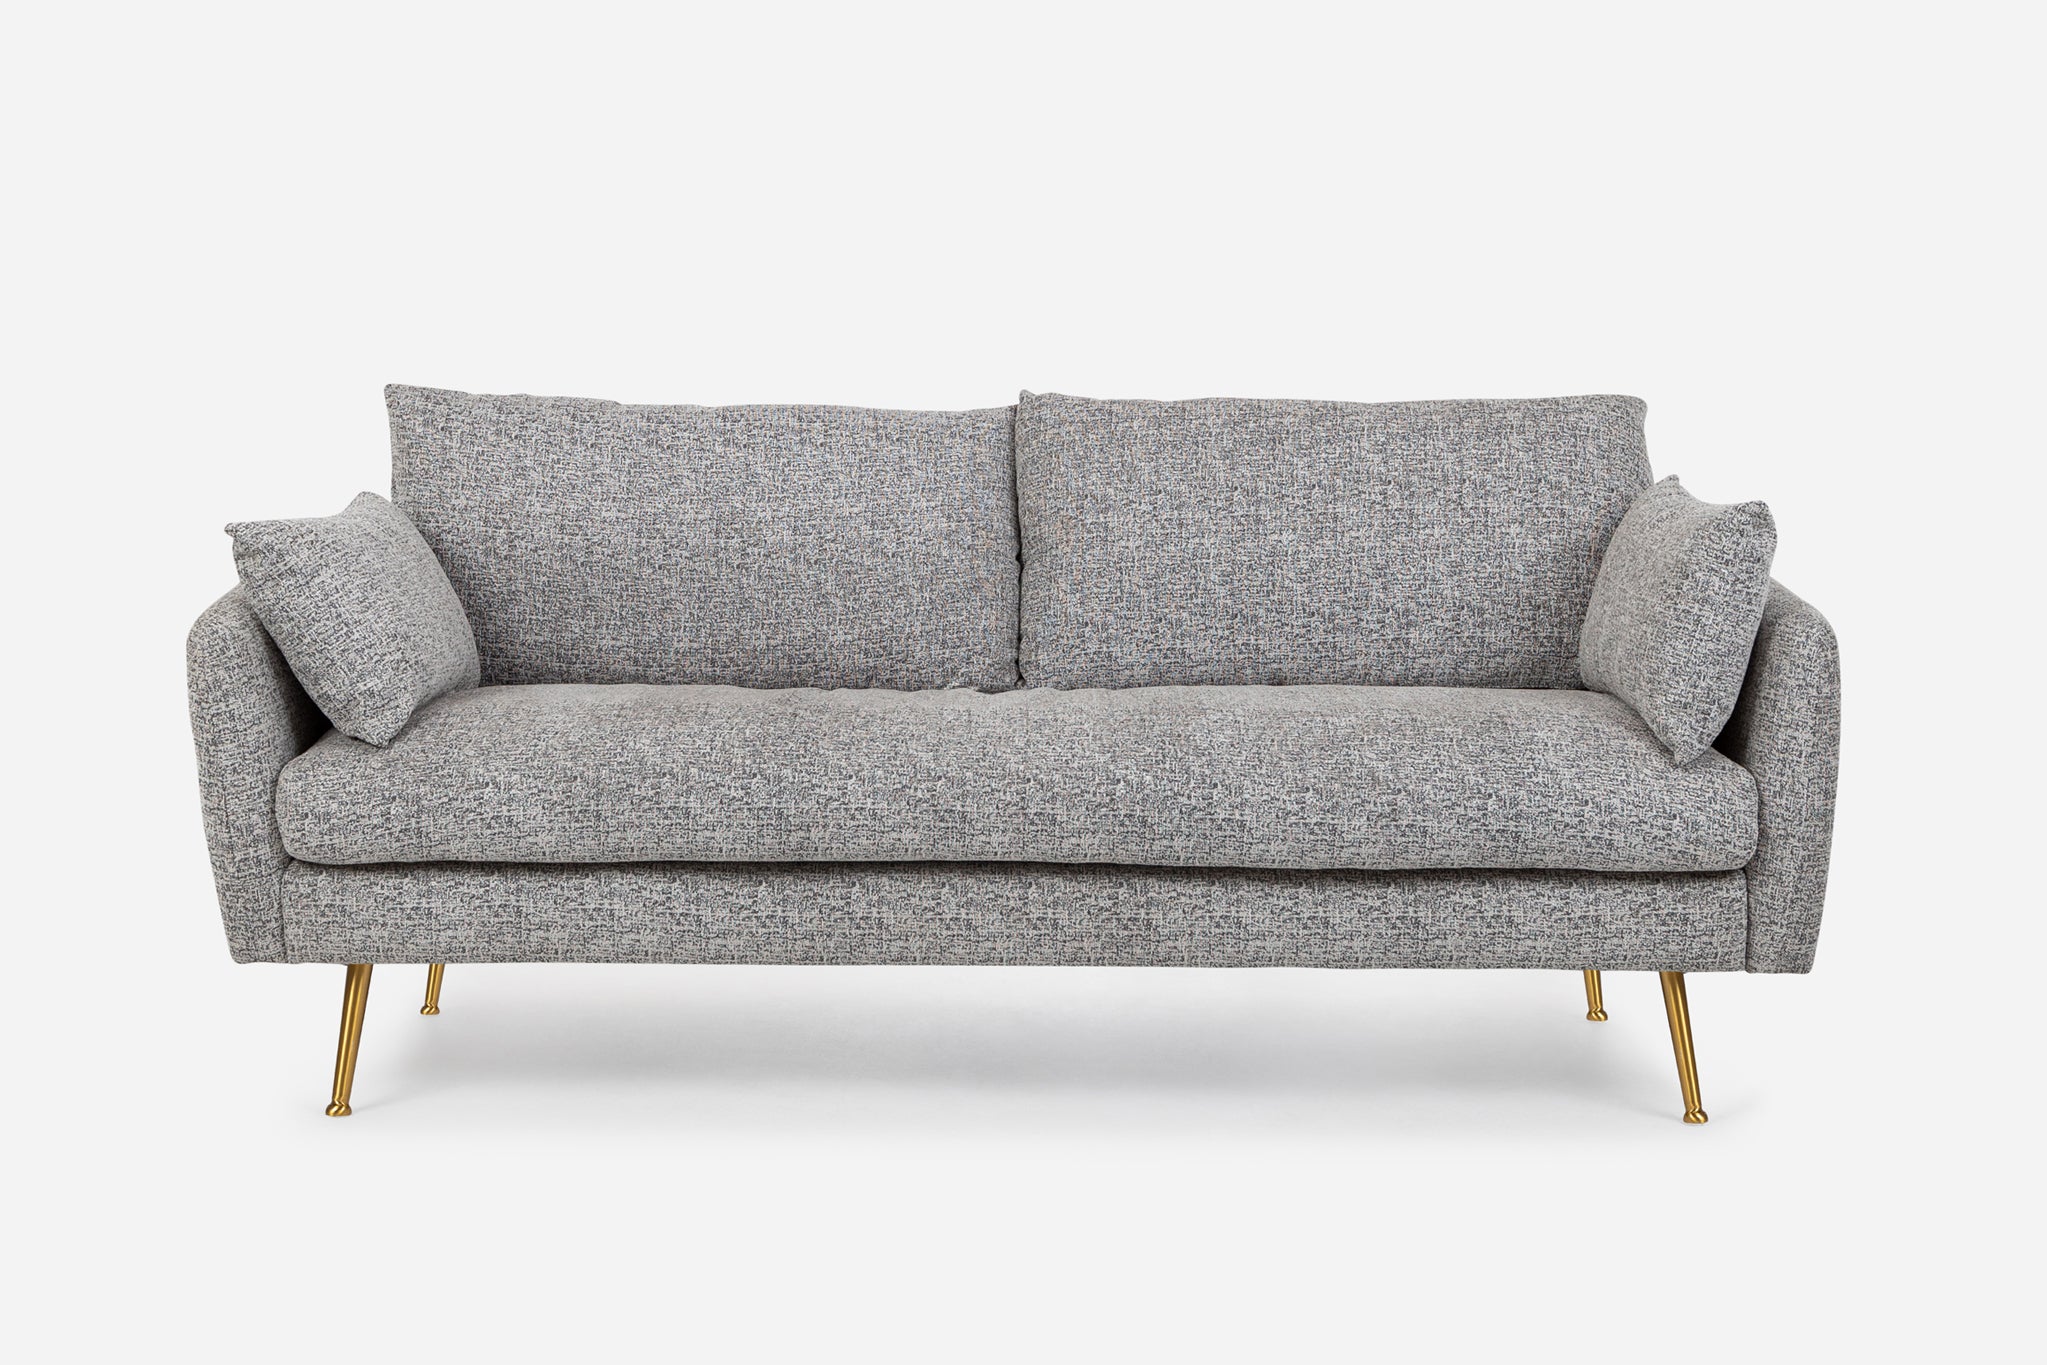 park sofa shown in grey fabric with gold legs